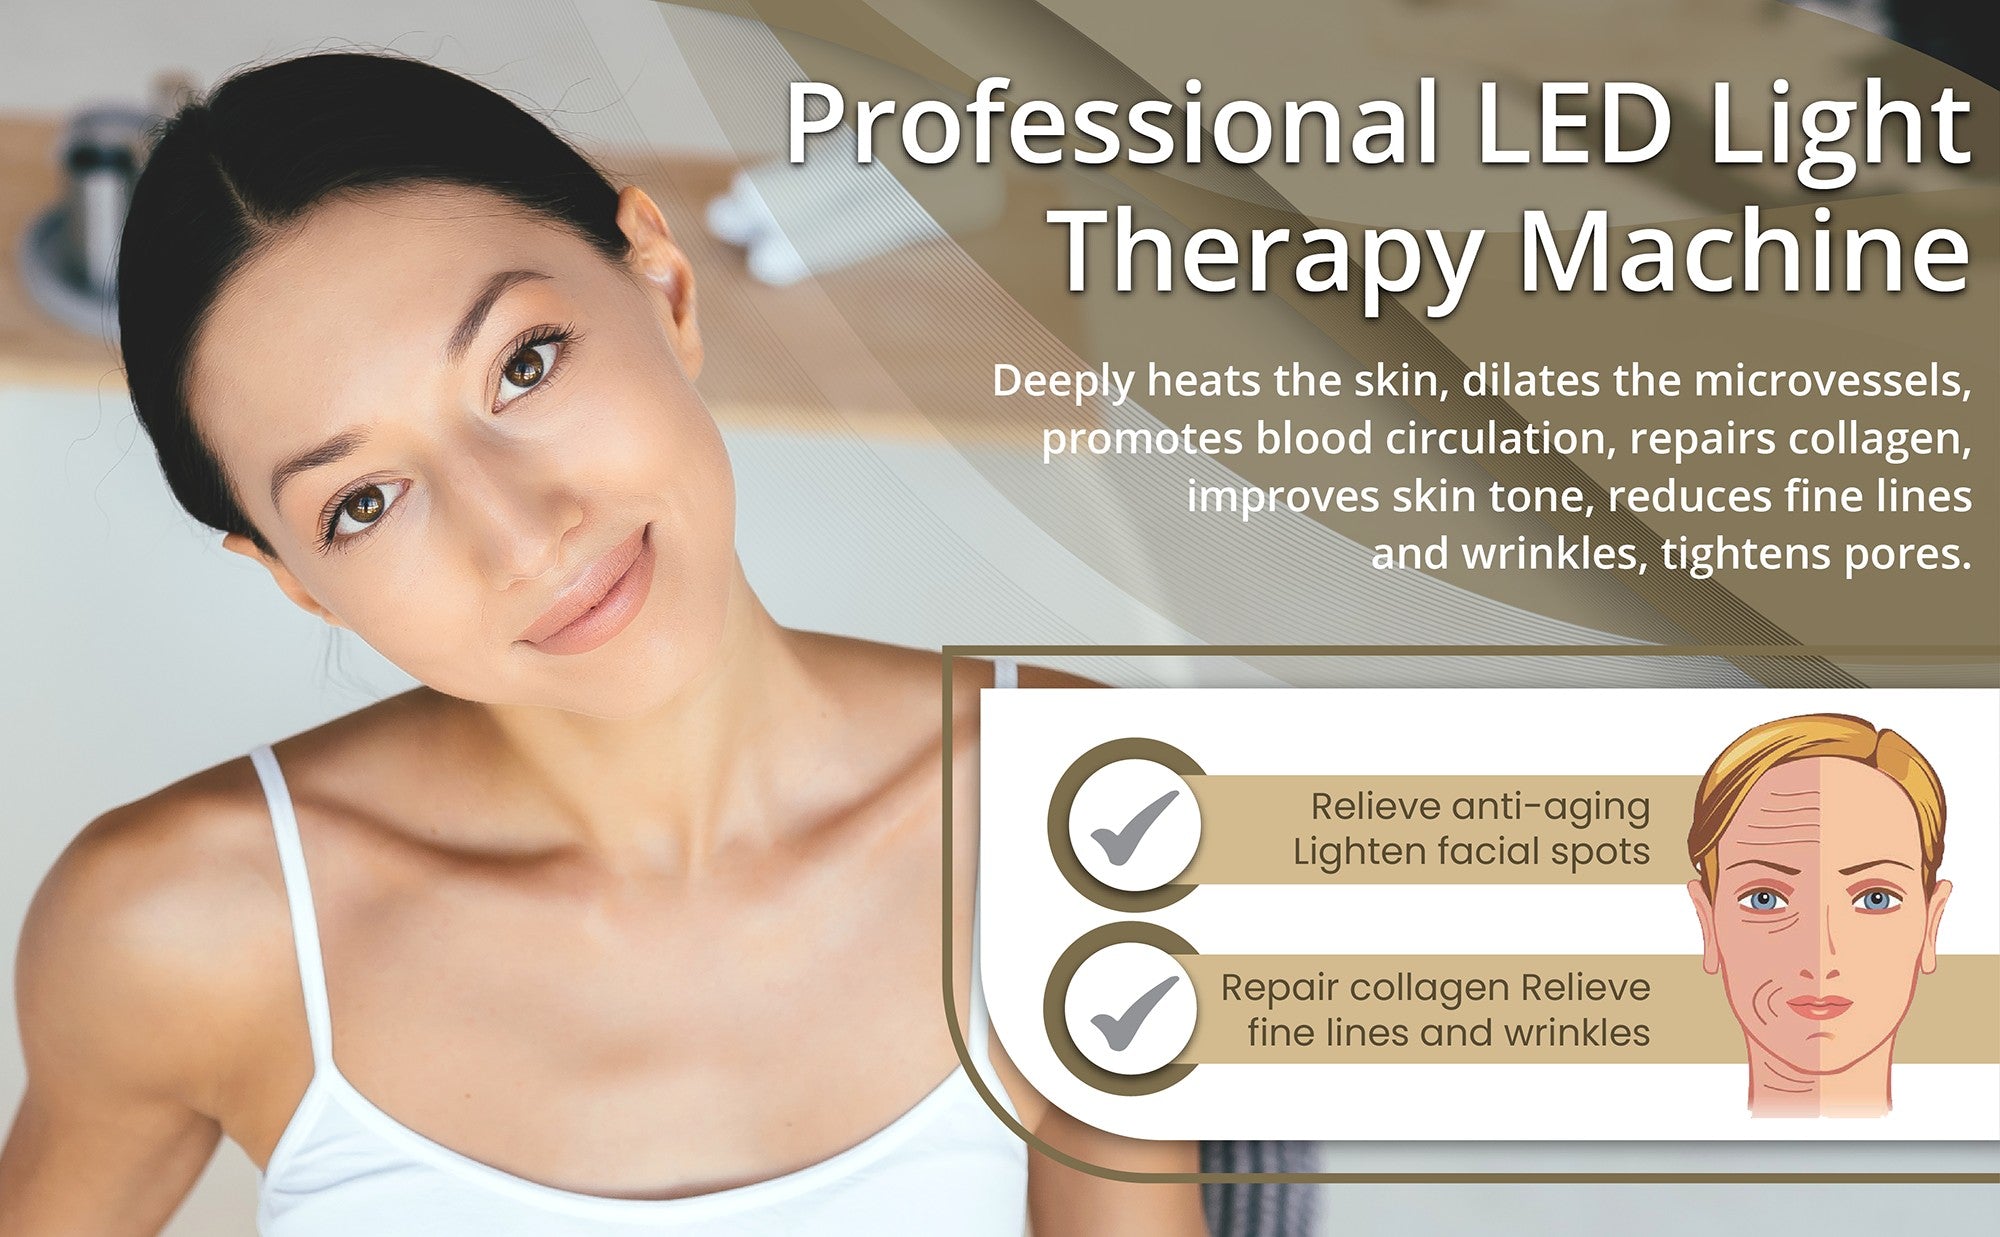 Advanced Skin Treatments: What Is Led Light Therapy And Is It For